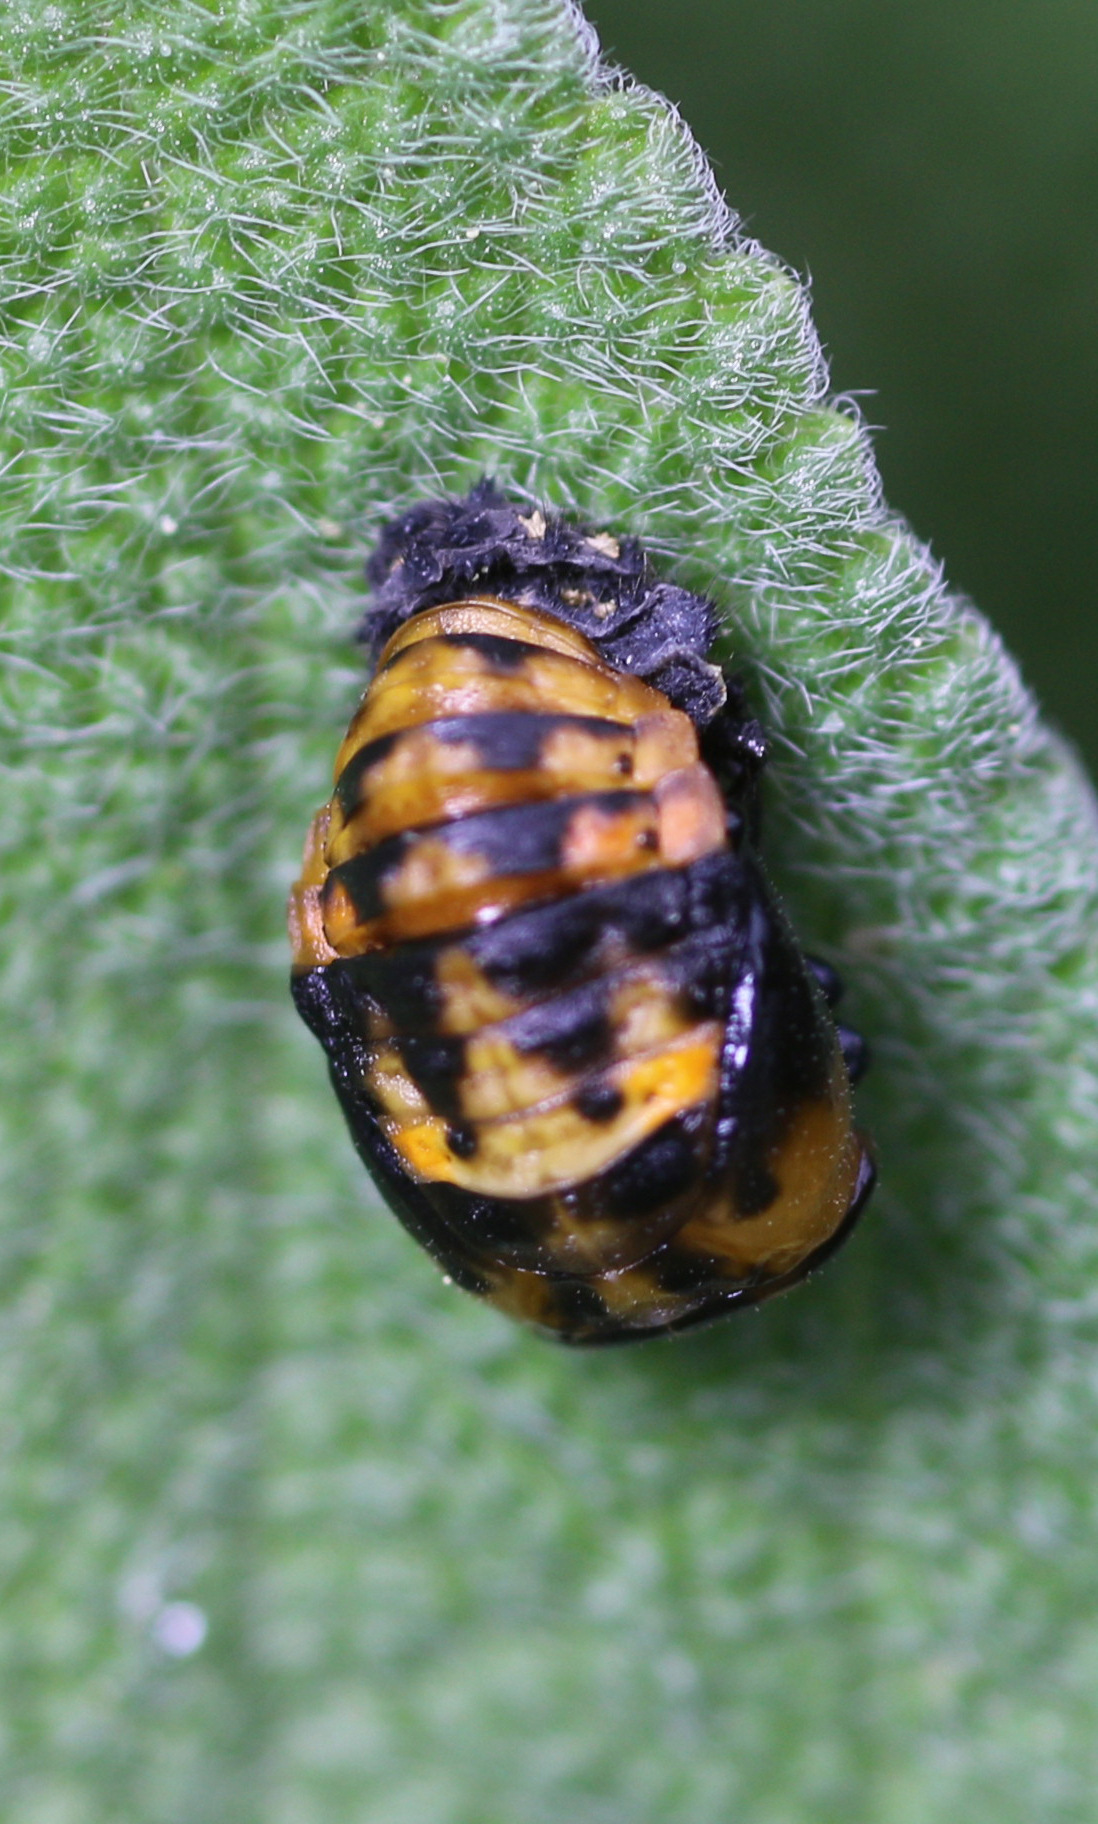 That's Not a Yellow Ladybug—It's an Invasive Asian Lady Beetle